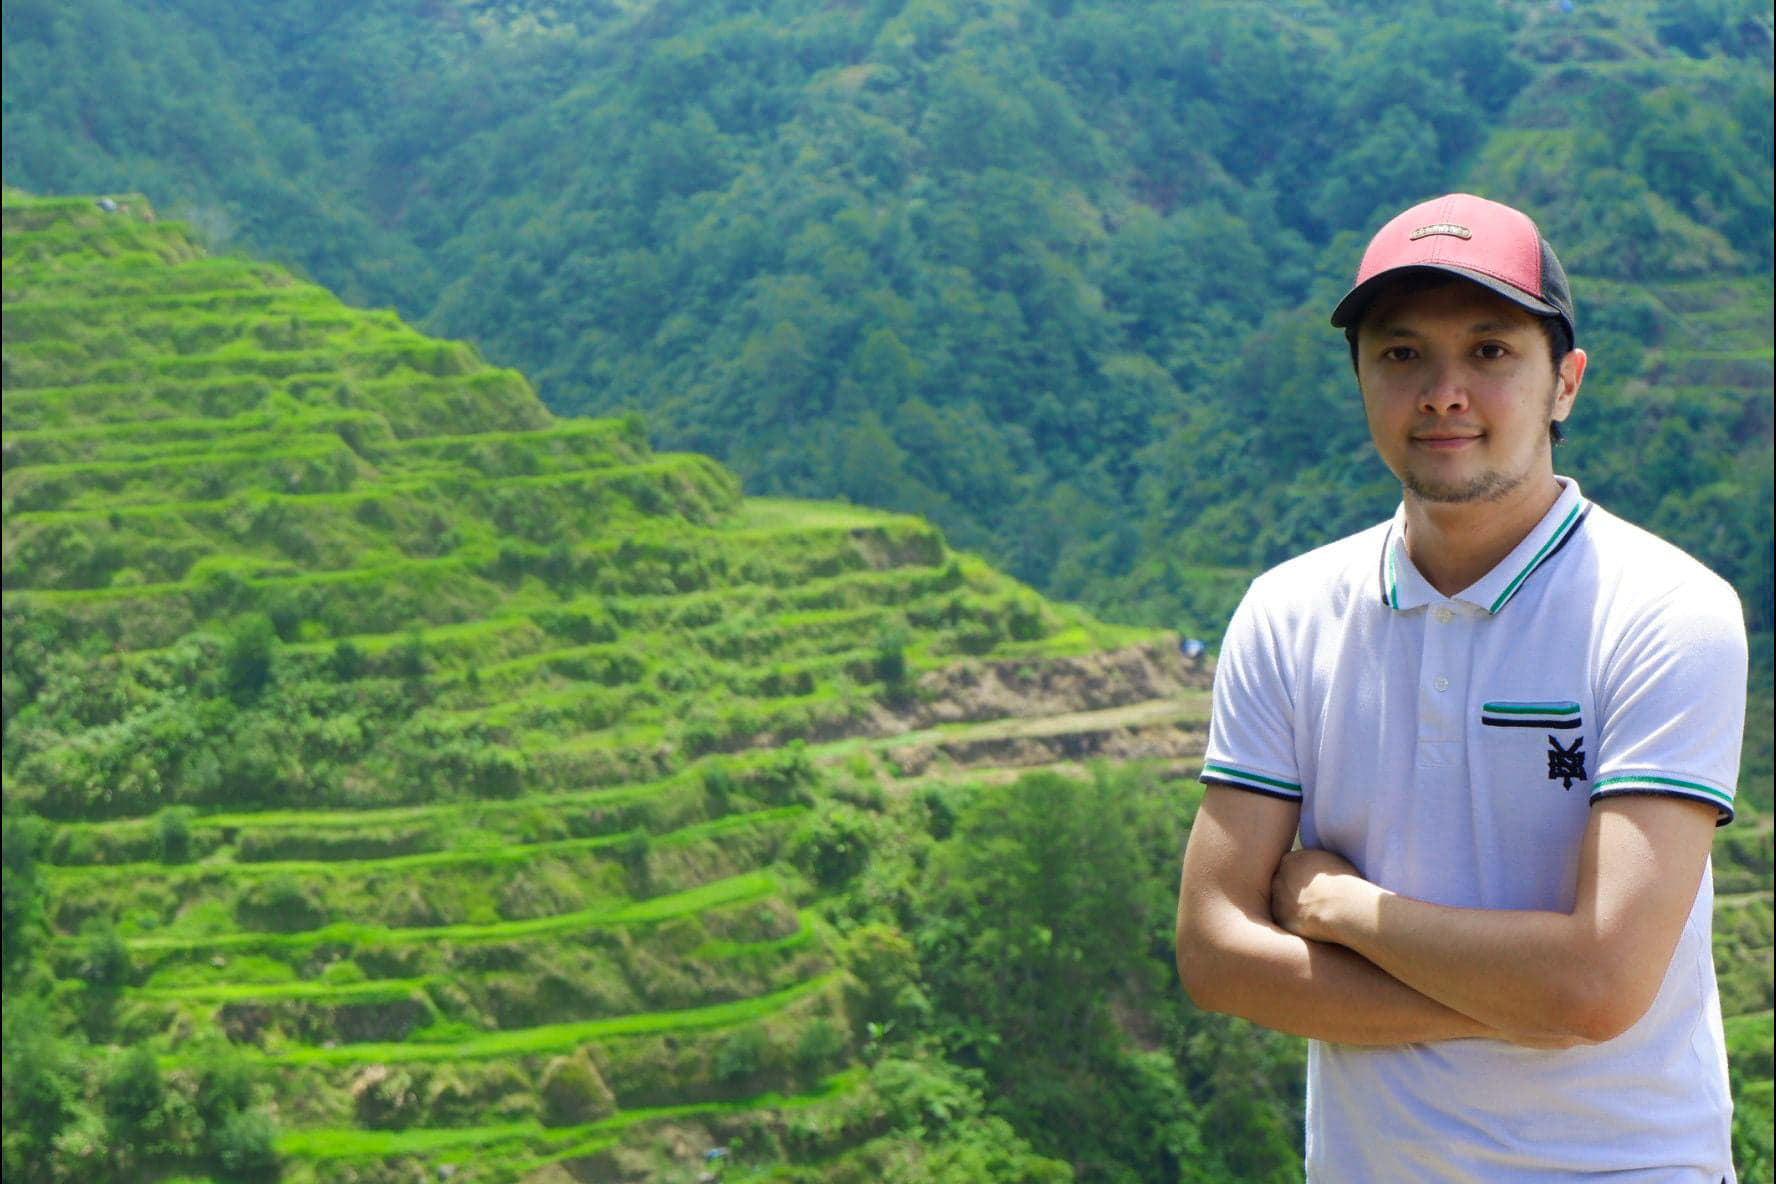 The Wonders of Discoveries Through Travels (Travel Blog Series Featuring Jaypee Limueco)